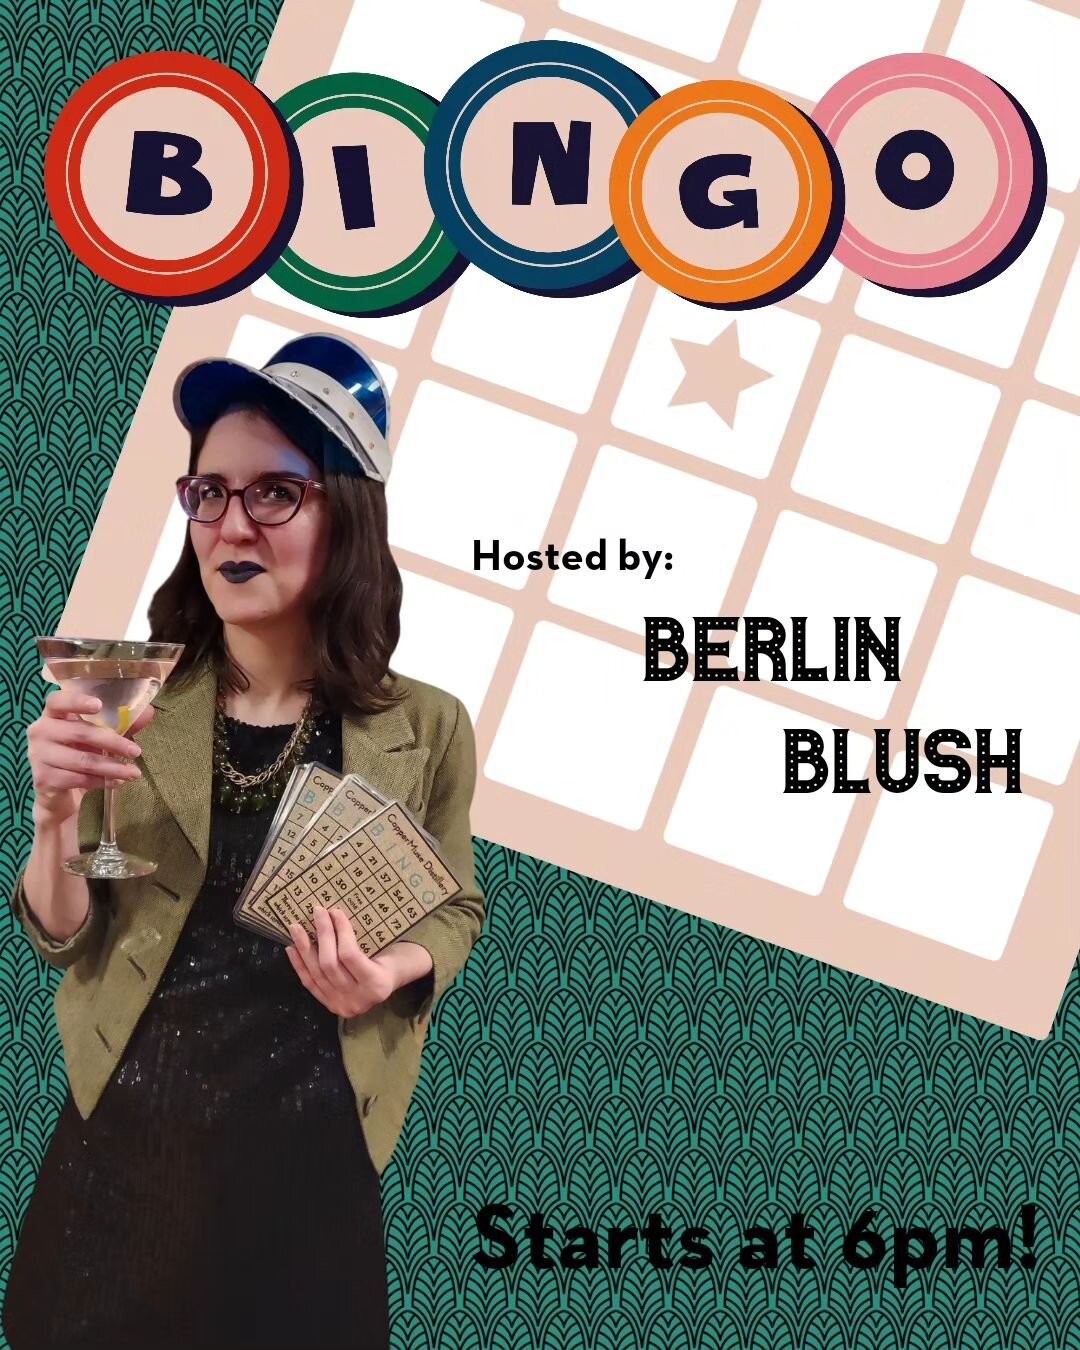 💥 It's Bingo Wednesday!!! 💥

Snag a drink and join us at 6pm for Bingo hosted by one of our favorites, Berlin Blush!

#foco #noco #Bingo! #beamuse #cocktails #downtown #downtownfortcollins #visitfortcollins #craftdistillery #craftcocktails #Wednesd